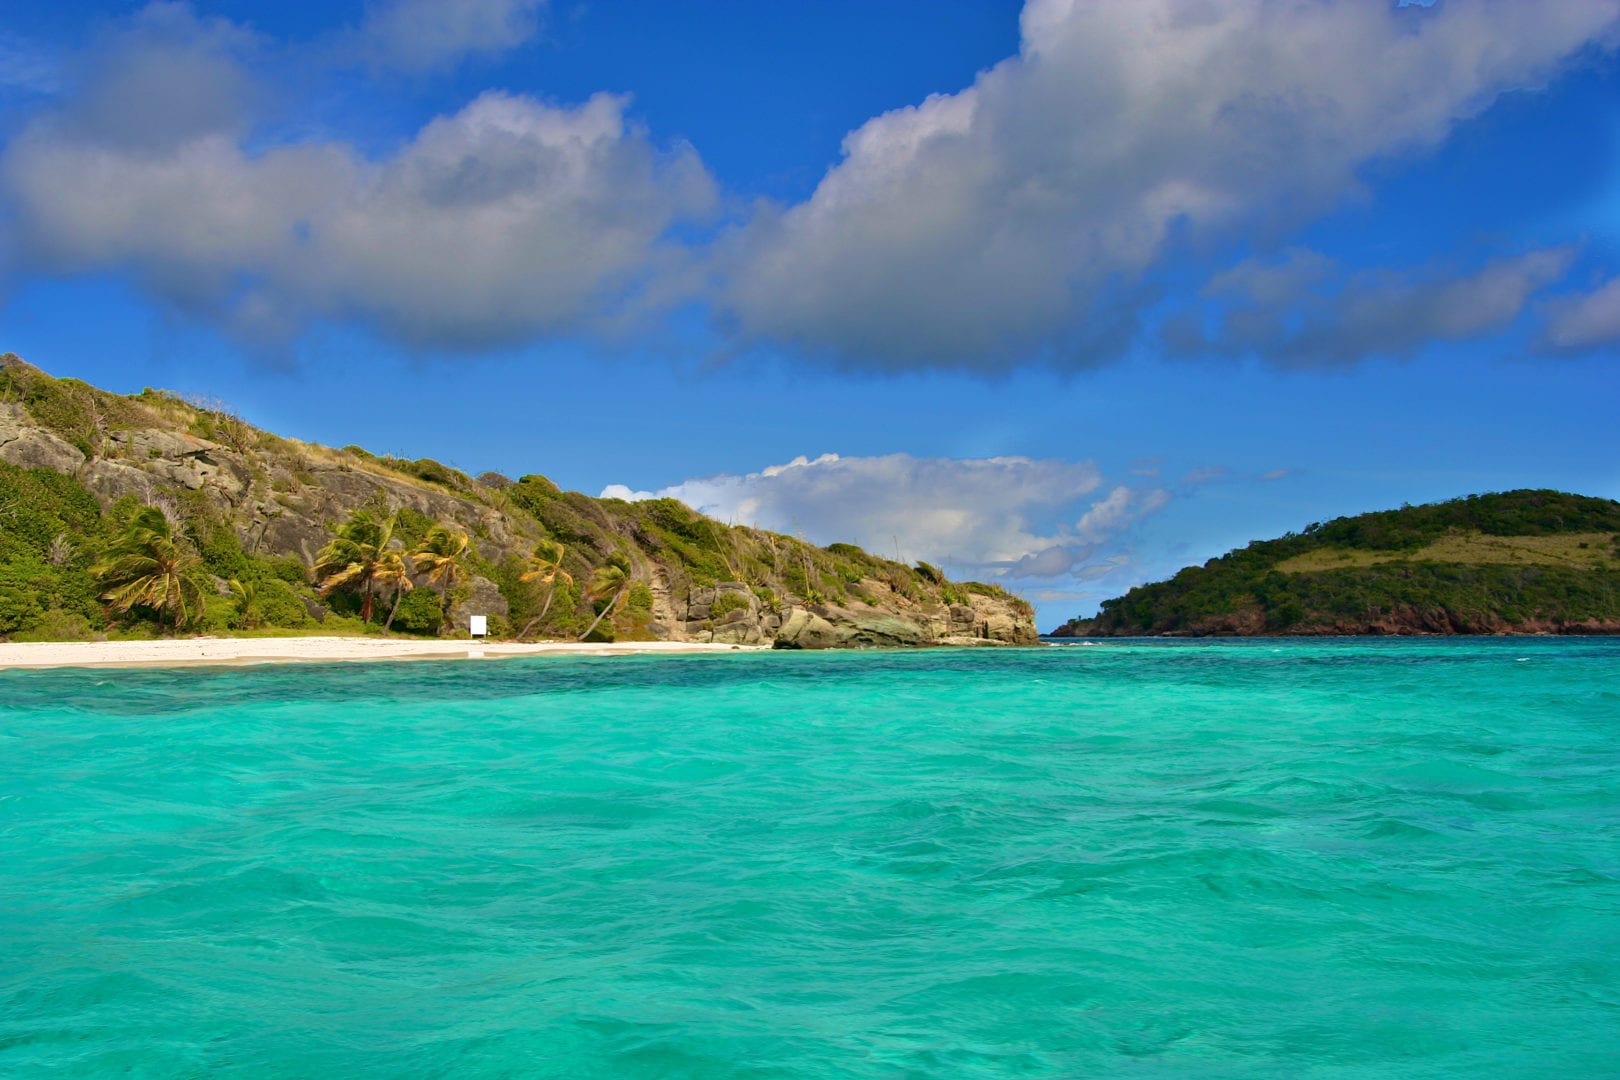 Hotels in St Vincent & the Grenadines